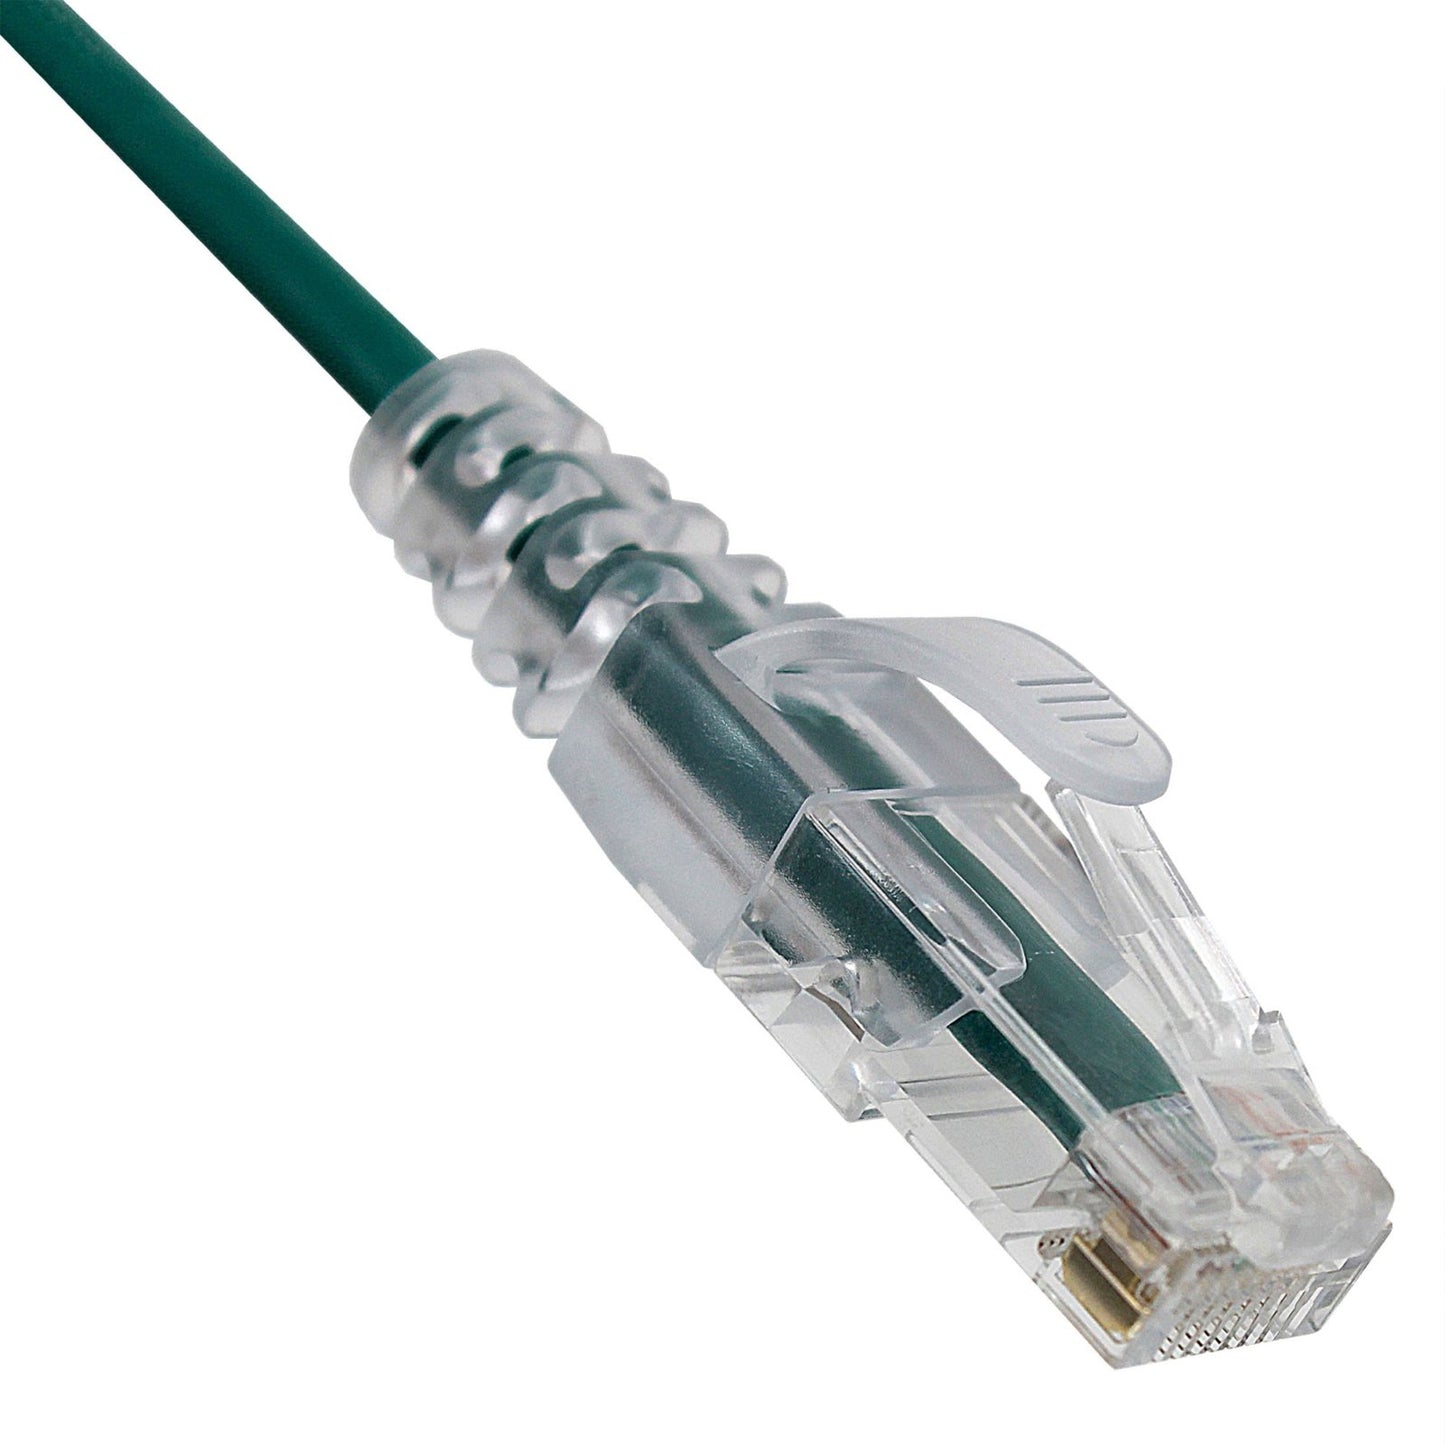 CAT 6A Ethernet Cable for GigE Swing Cameras (7ft-35ft)